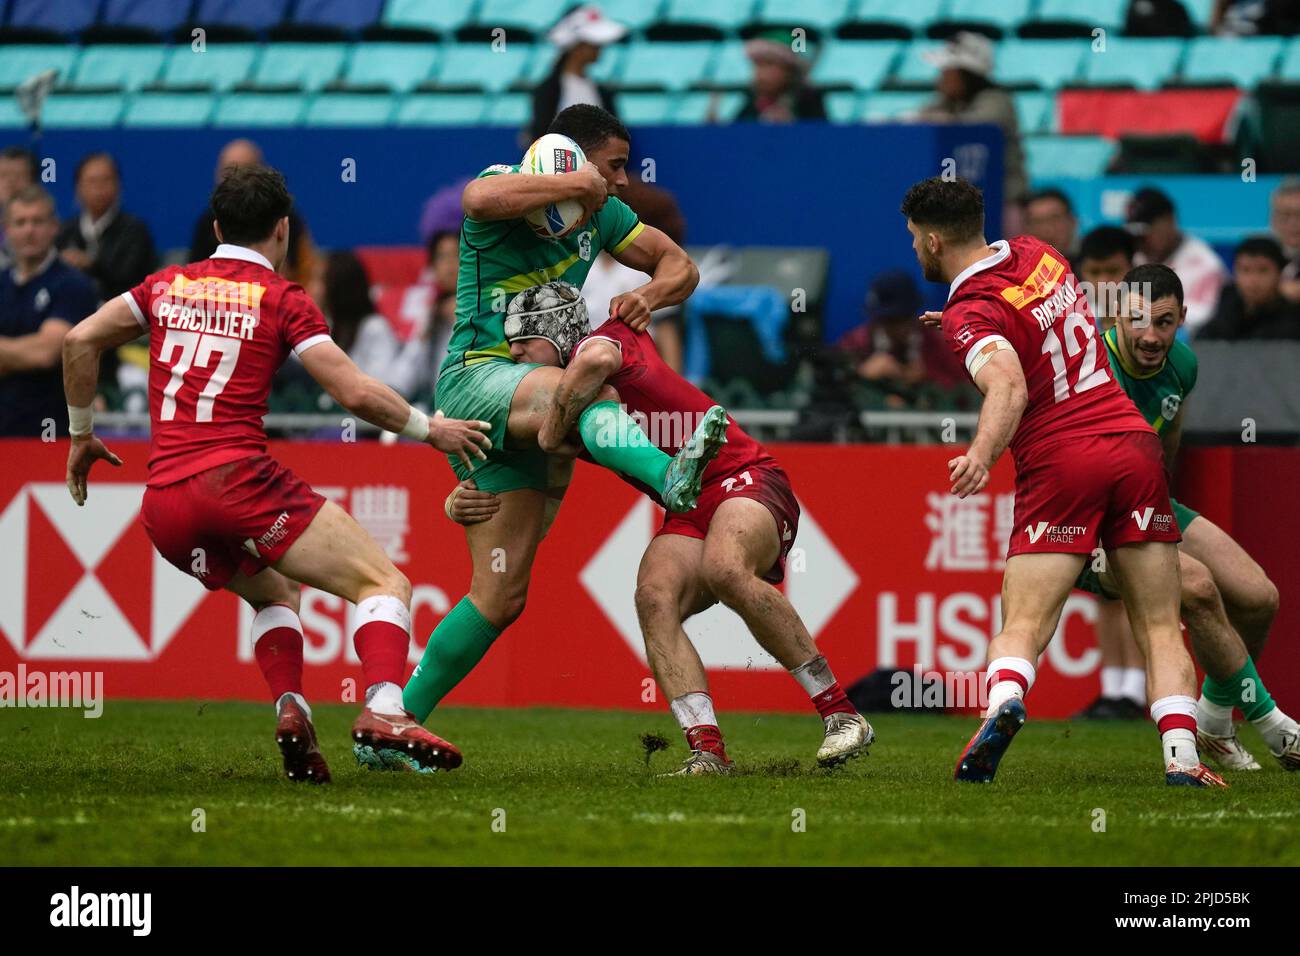 Ireland's Jordan Conroy, center left, is tackled by Canada's Max Stewart  during the 9th place quarterfinal match of the Hong Kong Sevens rugby  tournament in Hong Kong, Sunday, April 2, 2023. (AP